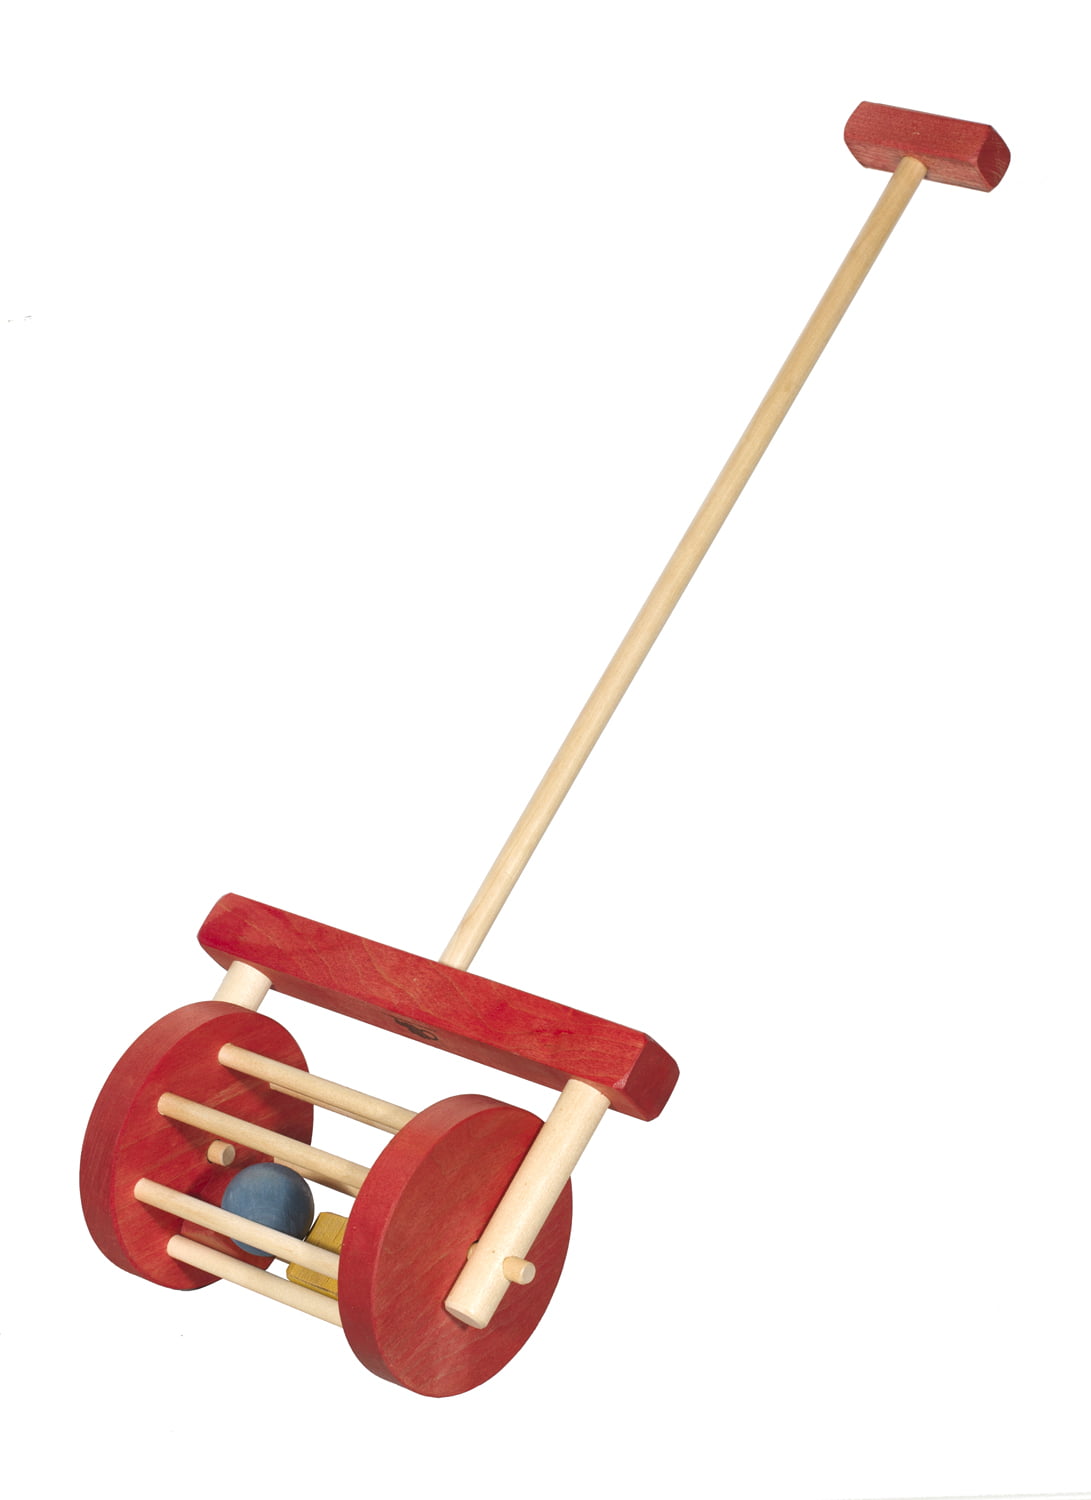 Child’s Wooden Maple and Walnut Block Roller